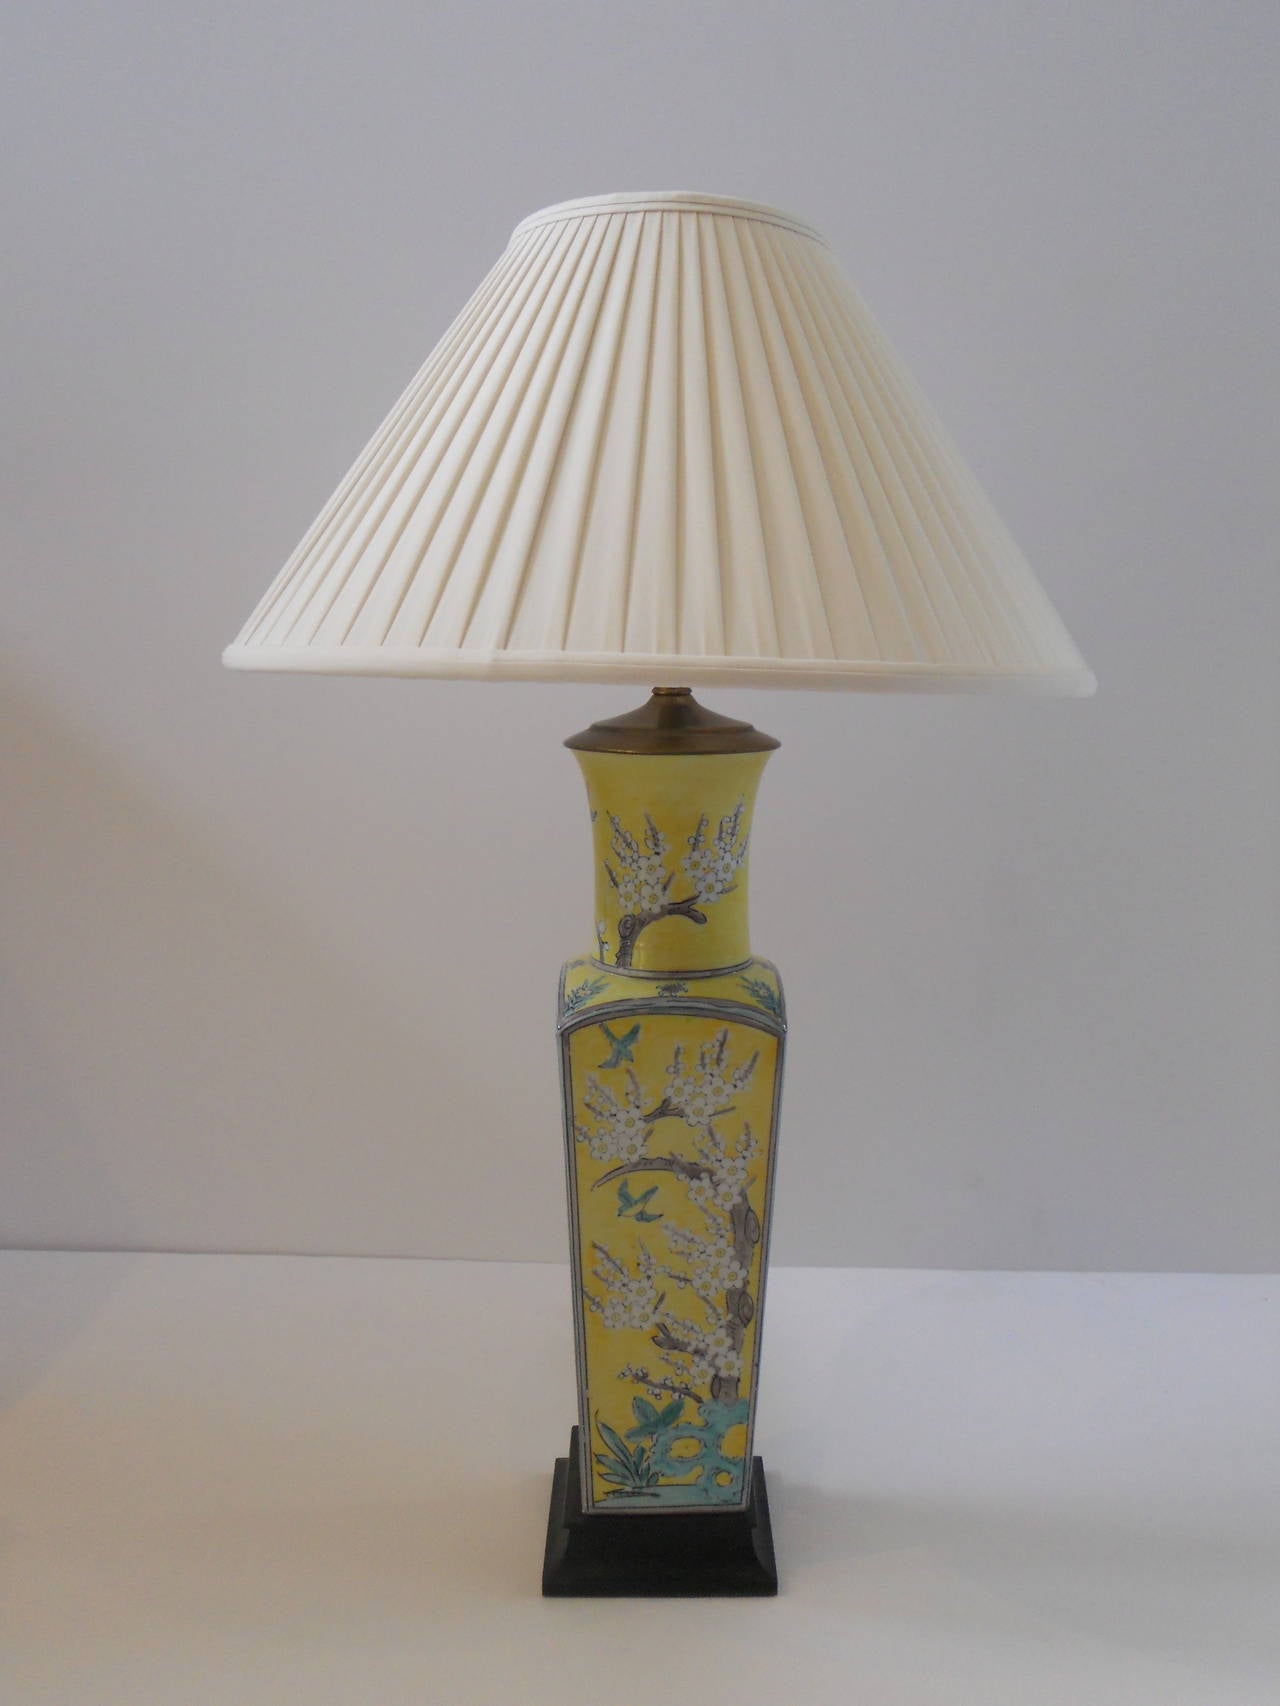 A tall, slender Chinese vase with blossom decoration. This piece is hand-painted in shades of pale green, white and soft brown on a yellow field. The vase is mounted on a square wooden base with new wiring and a new pleated, silk shade.

Shade